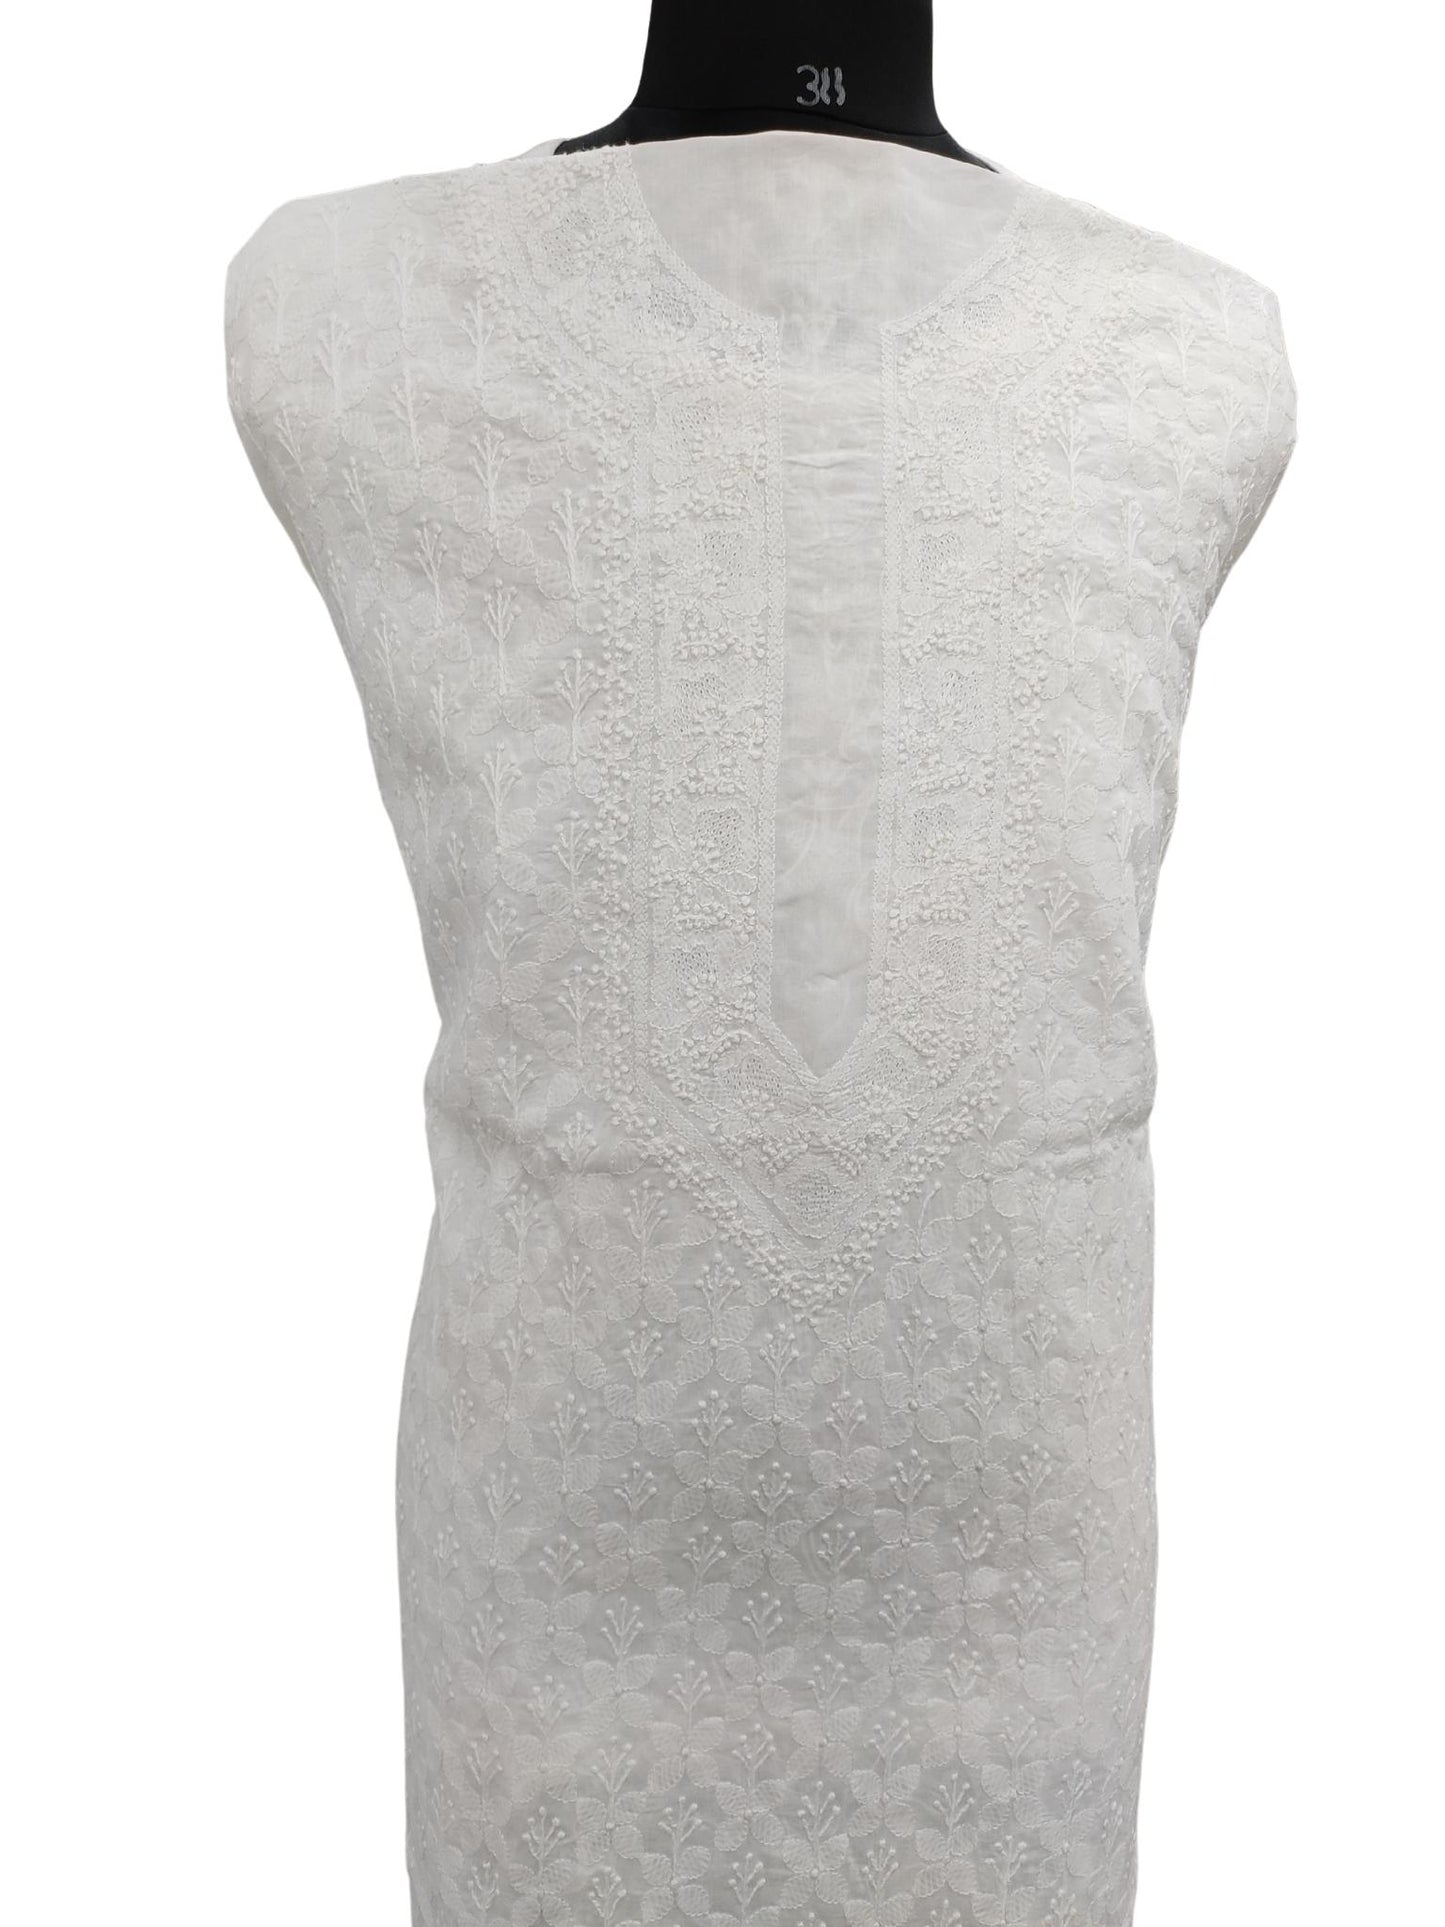 Shyamal Chikan Hand Embroidered White Lawn Cotton Lucknowi All-Over Chikankari Unstitched Men's Kurta Piece – S16069